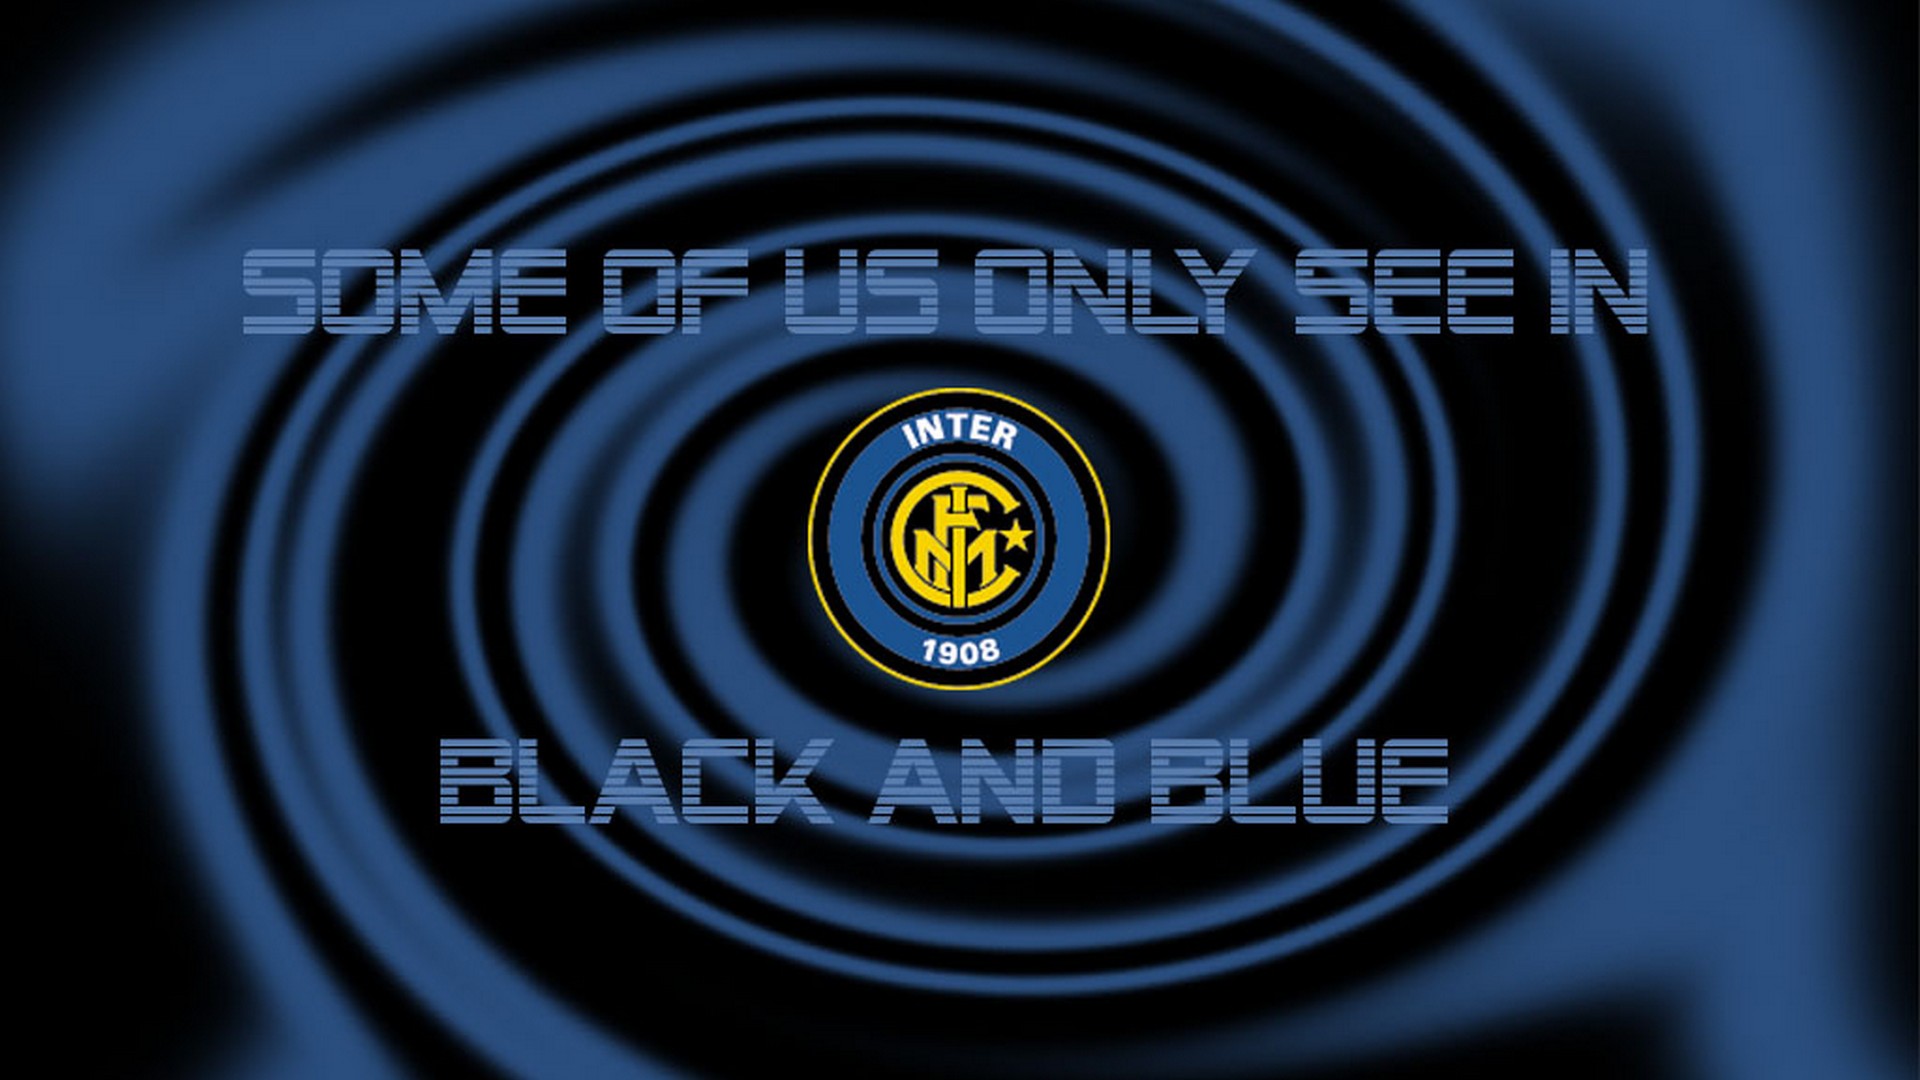 Windows Wallpaper Inter Milan With high-resolution 1920X1080 pixel. You can use this wallpaper for your Desktop Computers, Mac Screensavers, Windows Backgrounds, iPhone Wallpapers, Tablet or Android Lock screen and another Mobile device